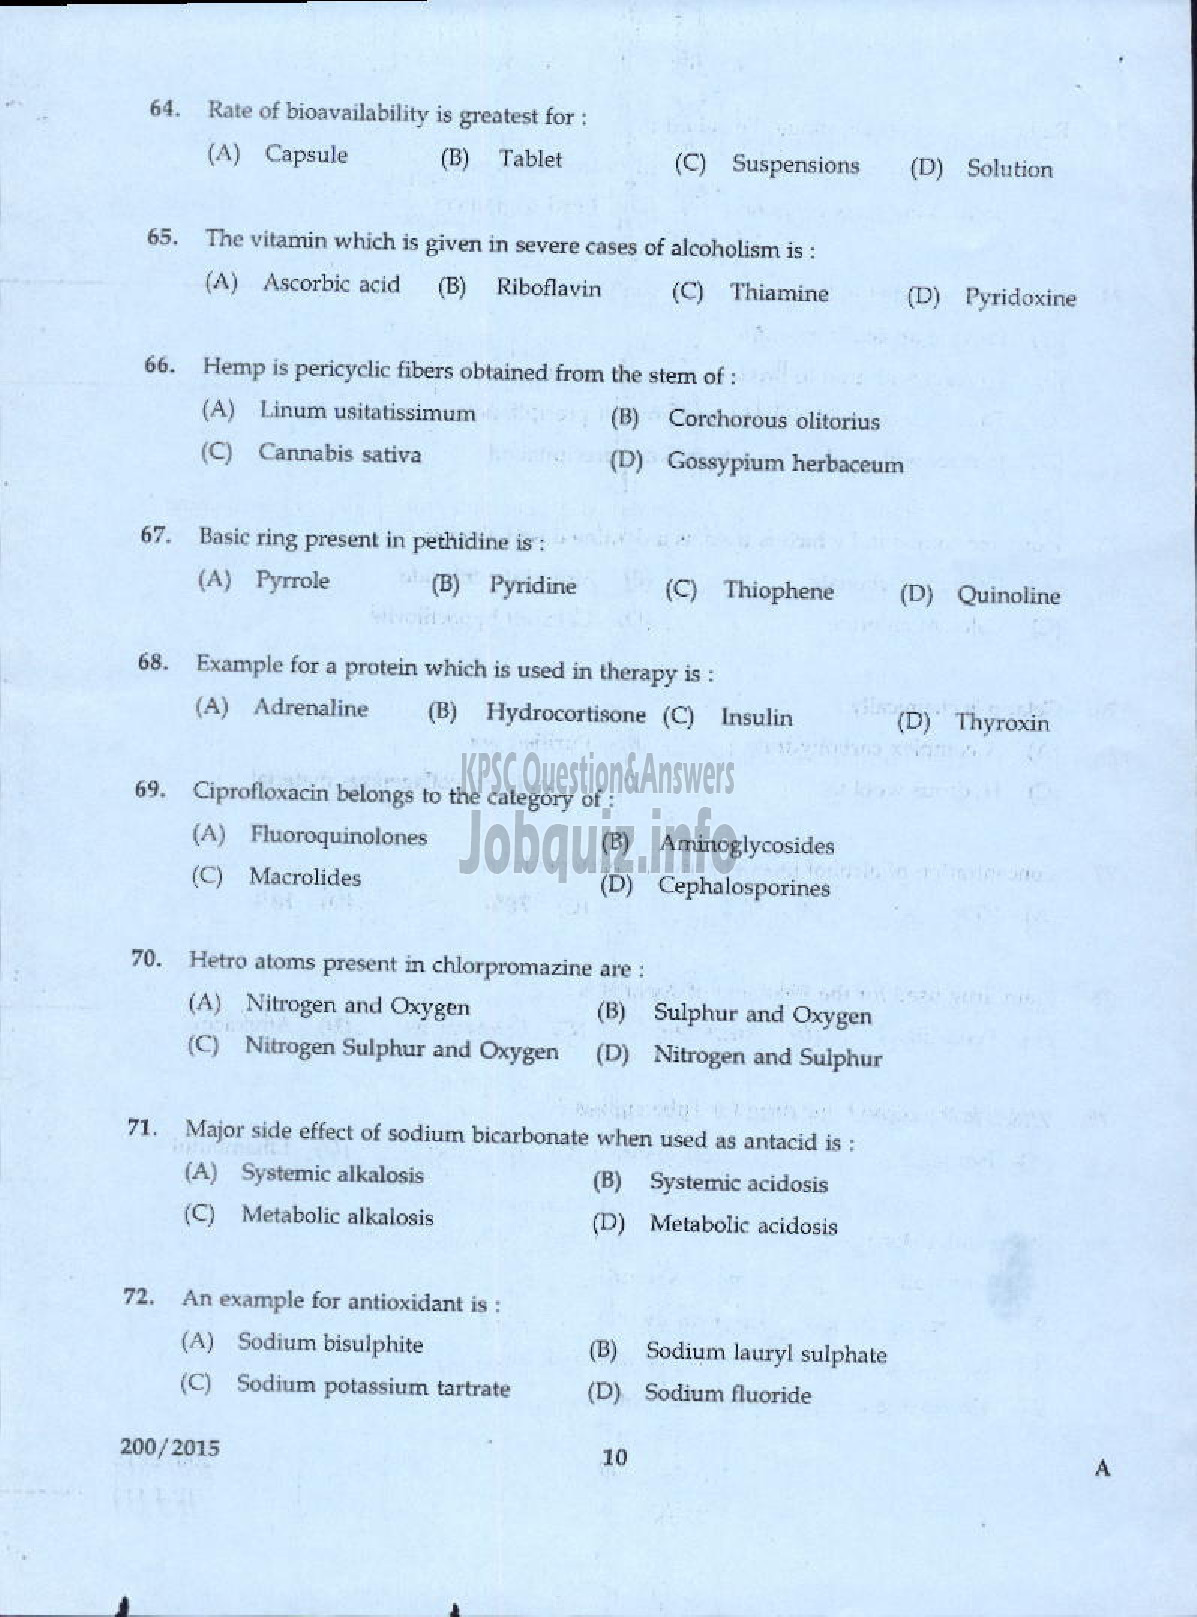 Kerala PSC Question Paper - PHARMACIST GR II HEALTH SERVICES-8